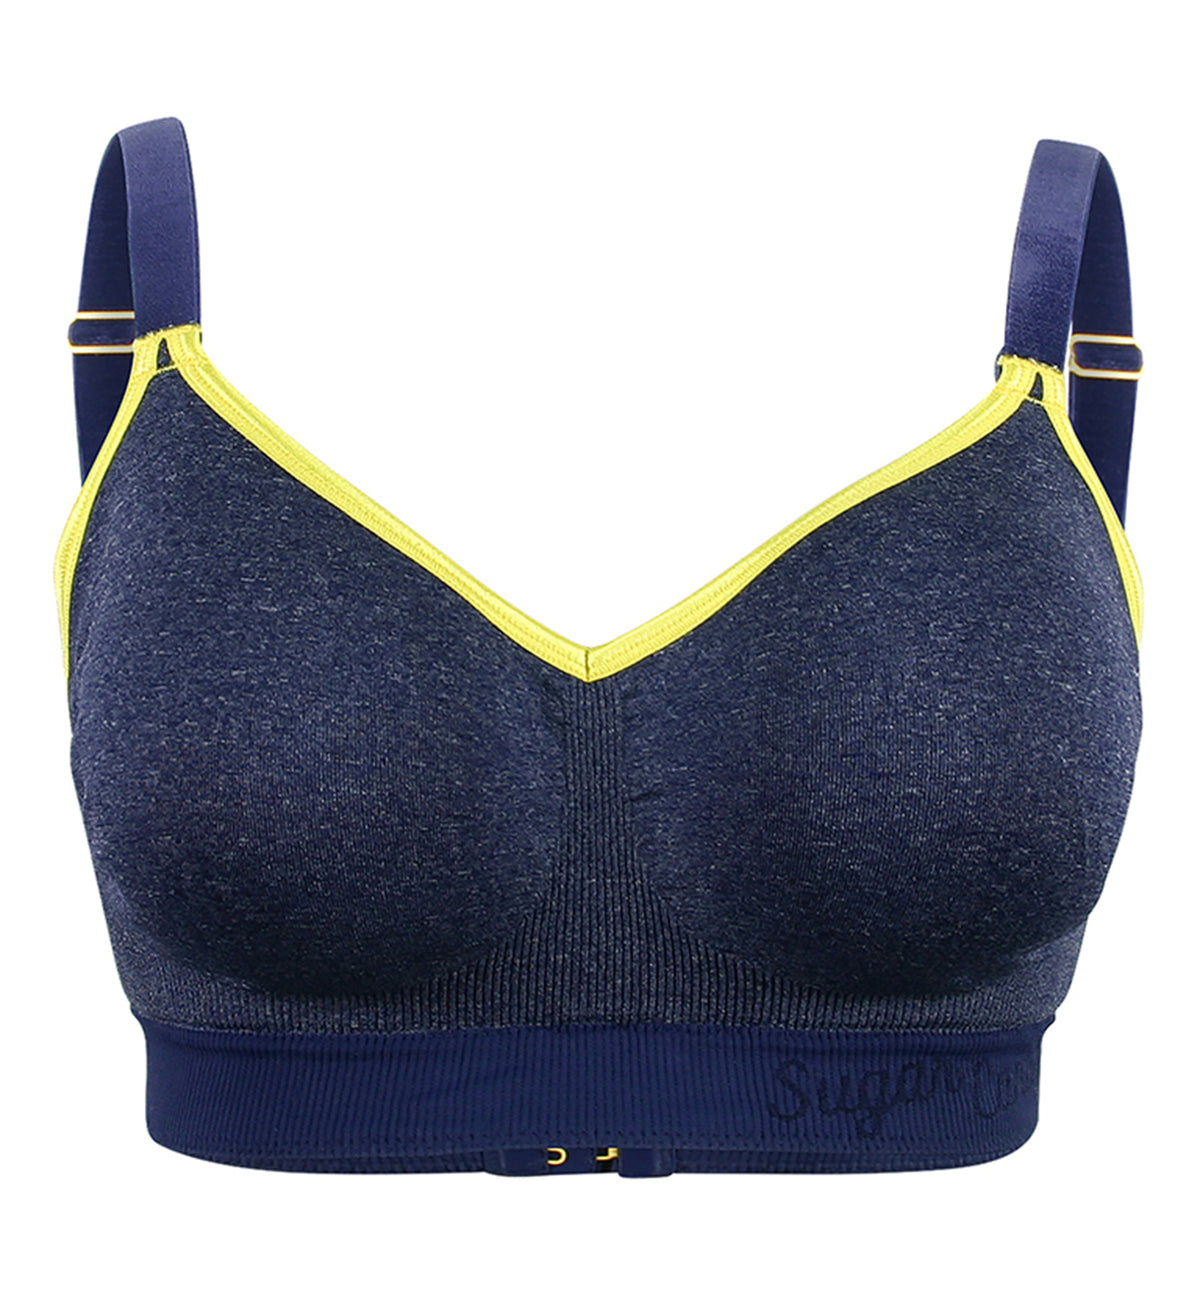 Sugar Candy by Cake Crush Seamless Fuller Bust Everyday Softcup G-L Cups (28-8008),XS,Denim - Denim,XS